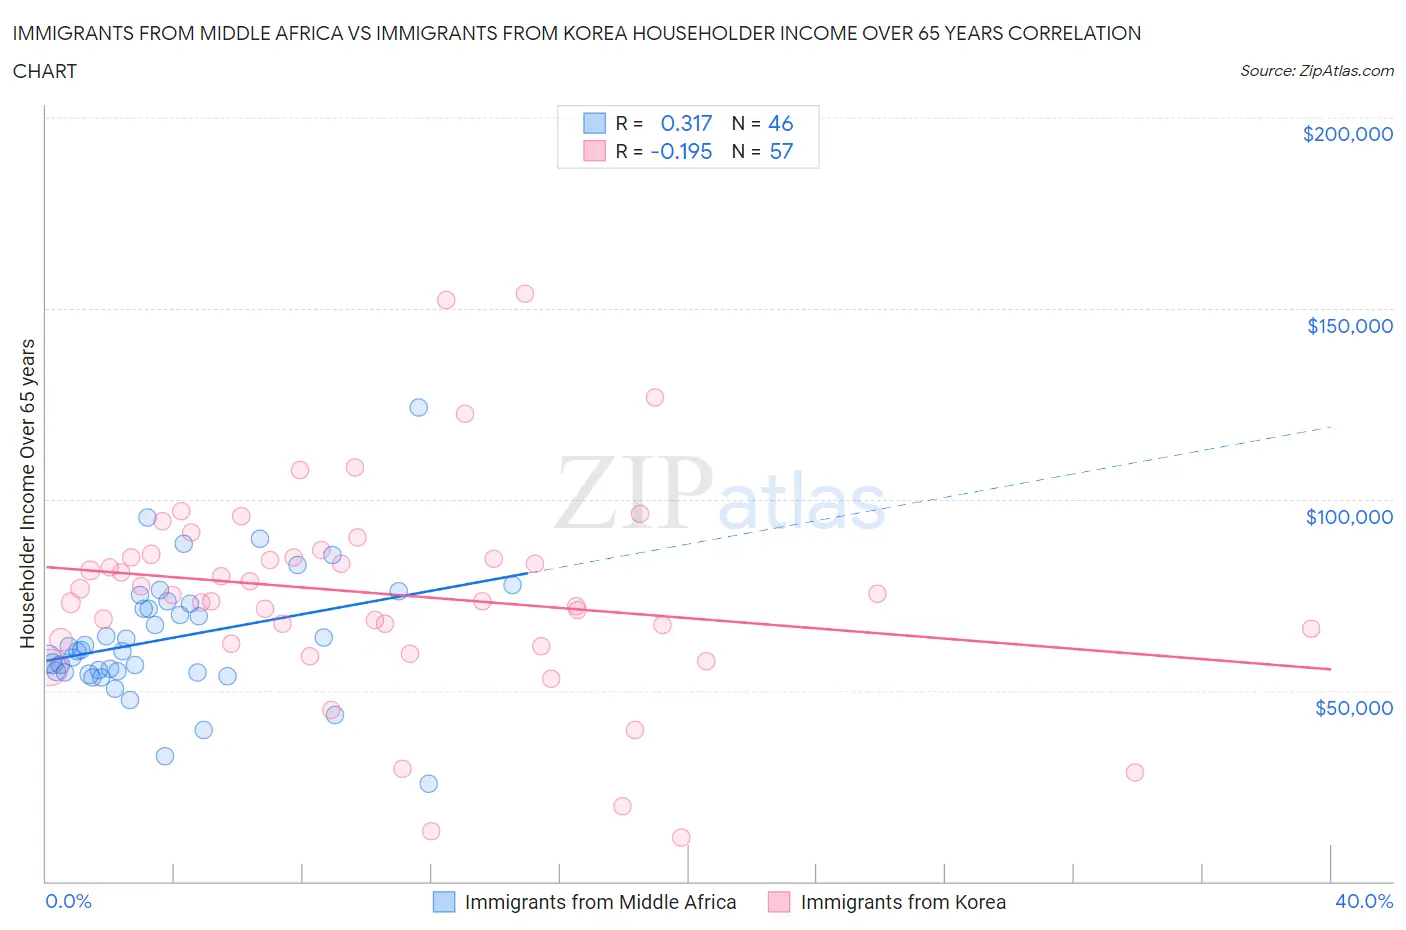 Immigrants from Middle Africa vs Immigrants from Korea Householder Income Over 65 years